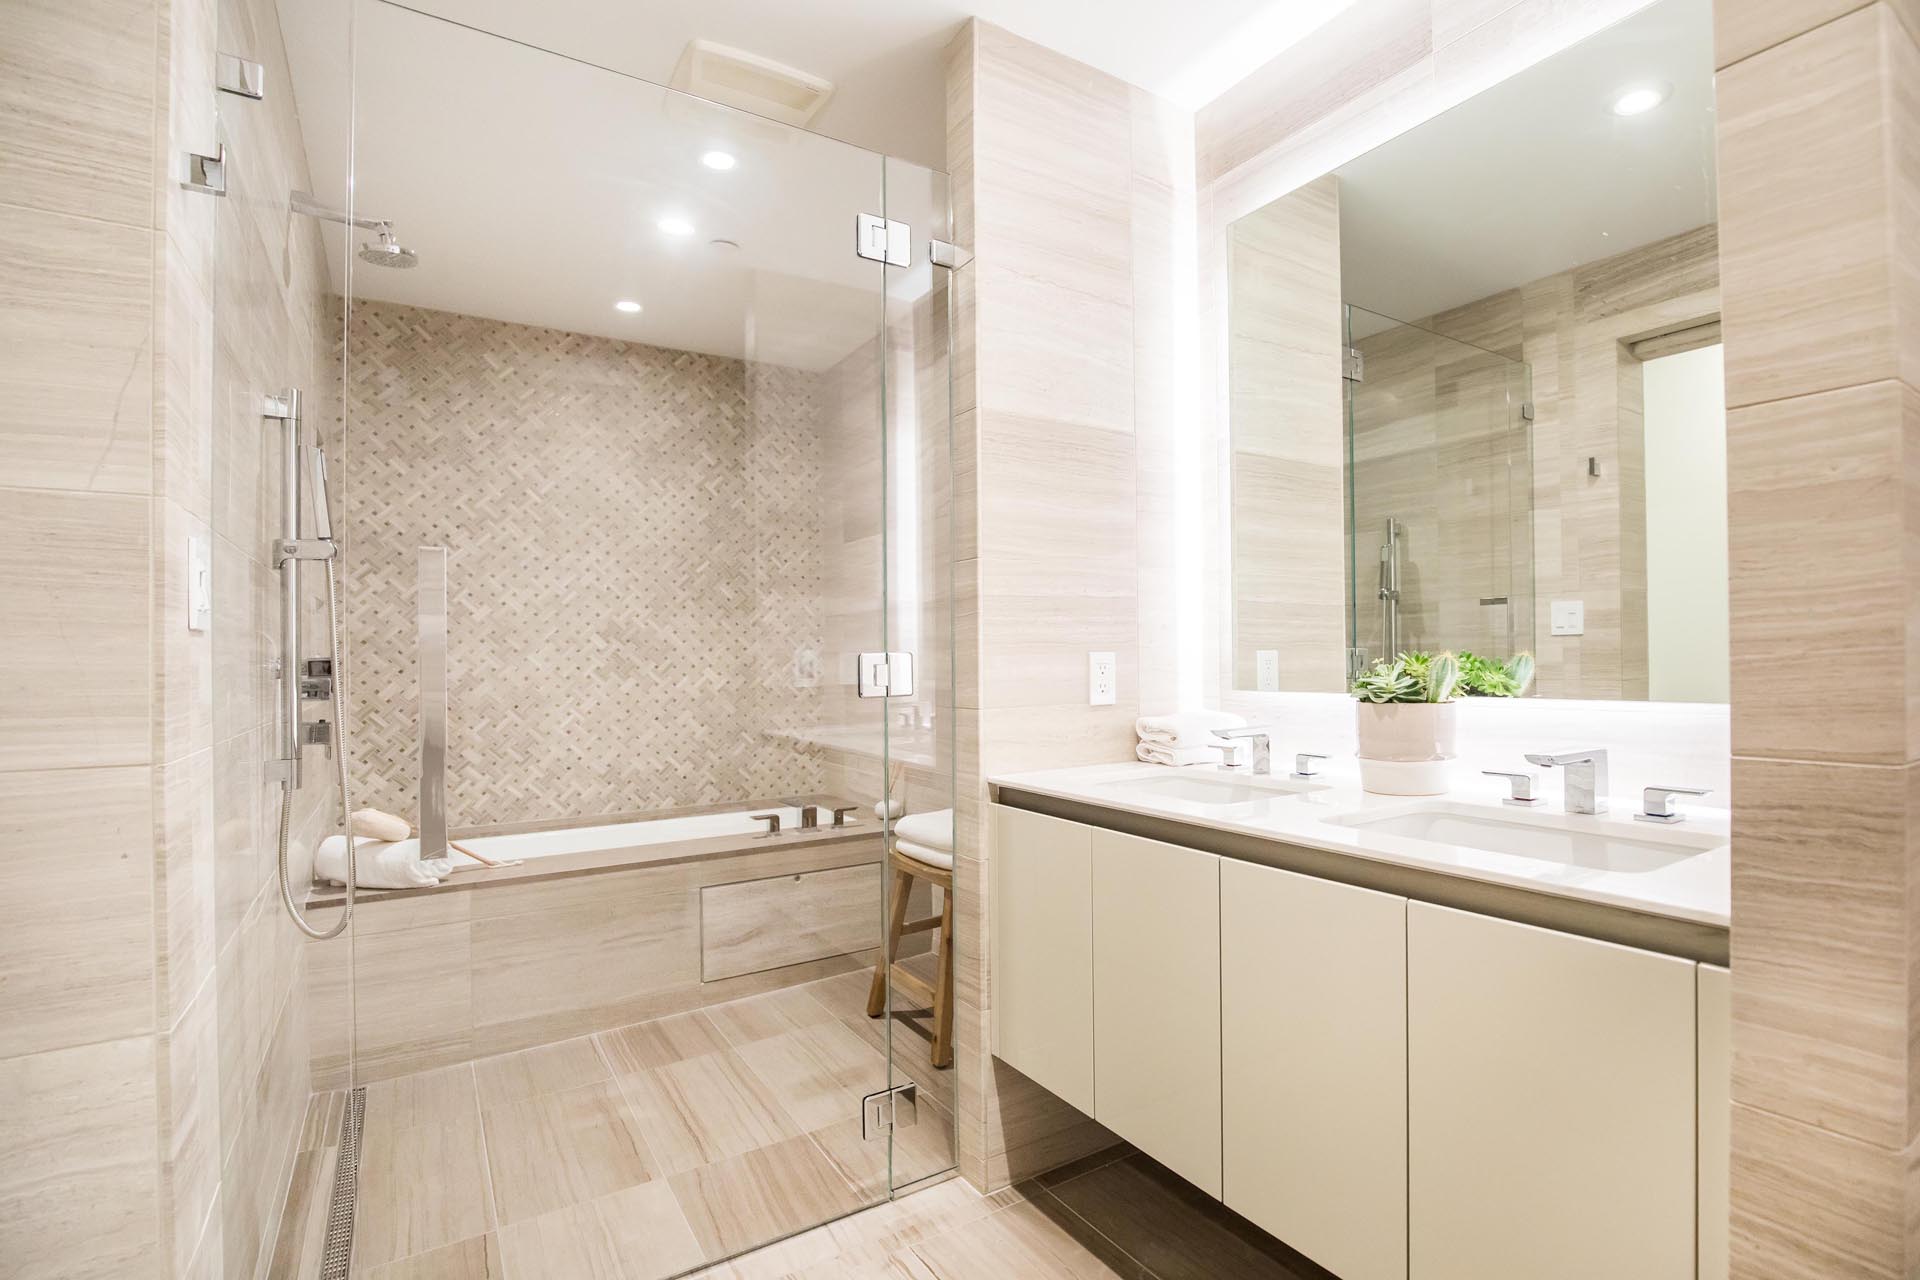 A modern bathroom with a neutral color palette.